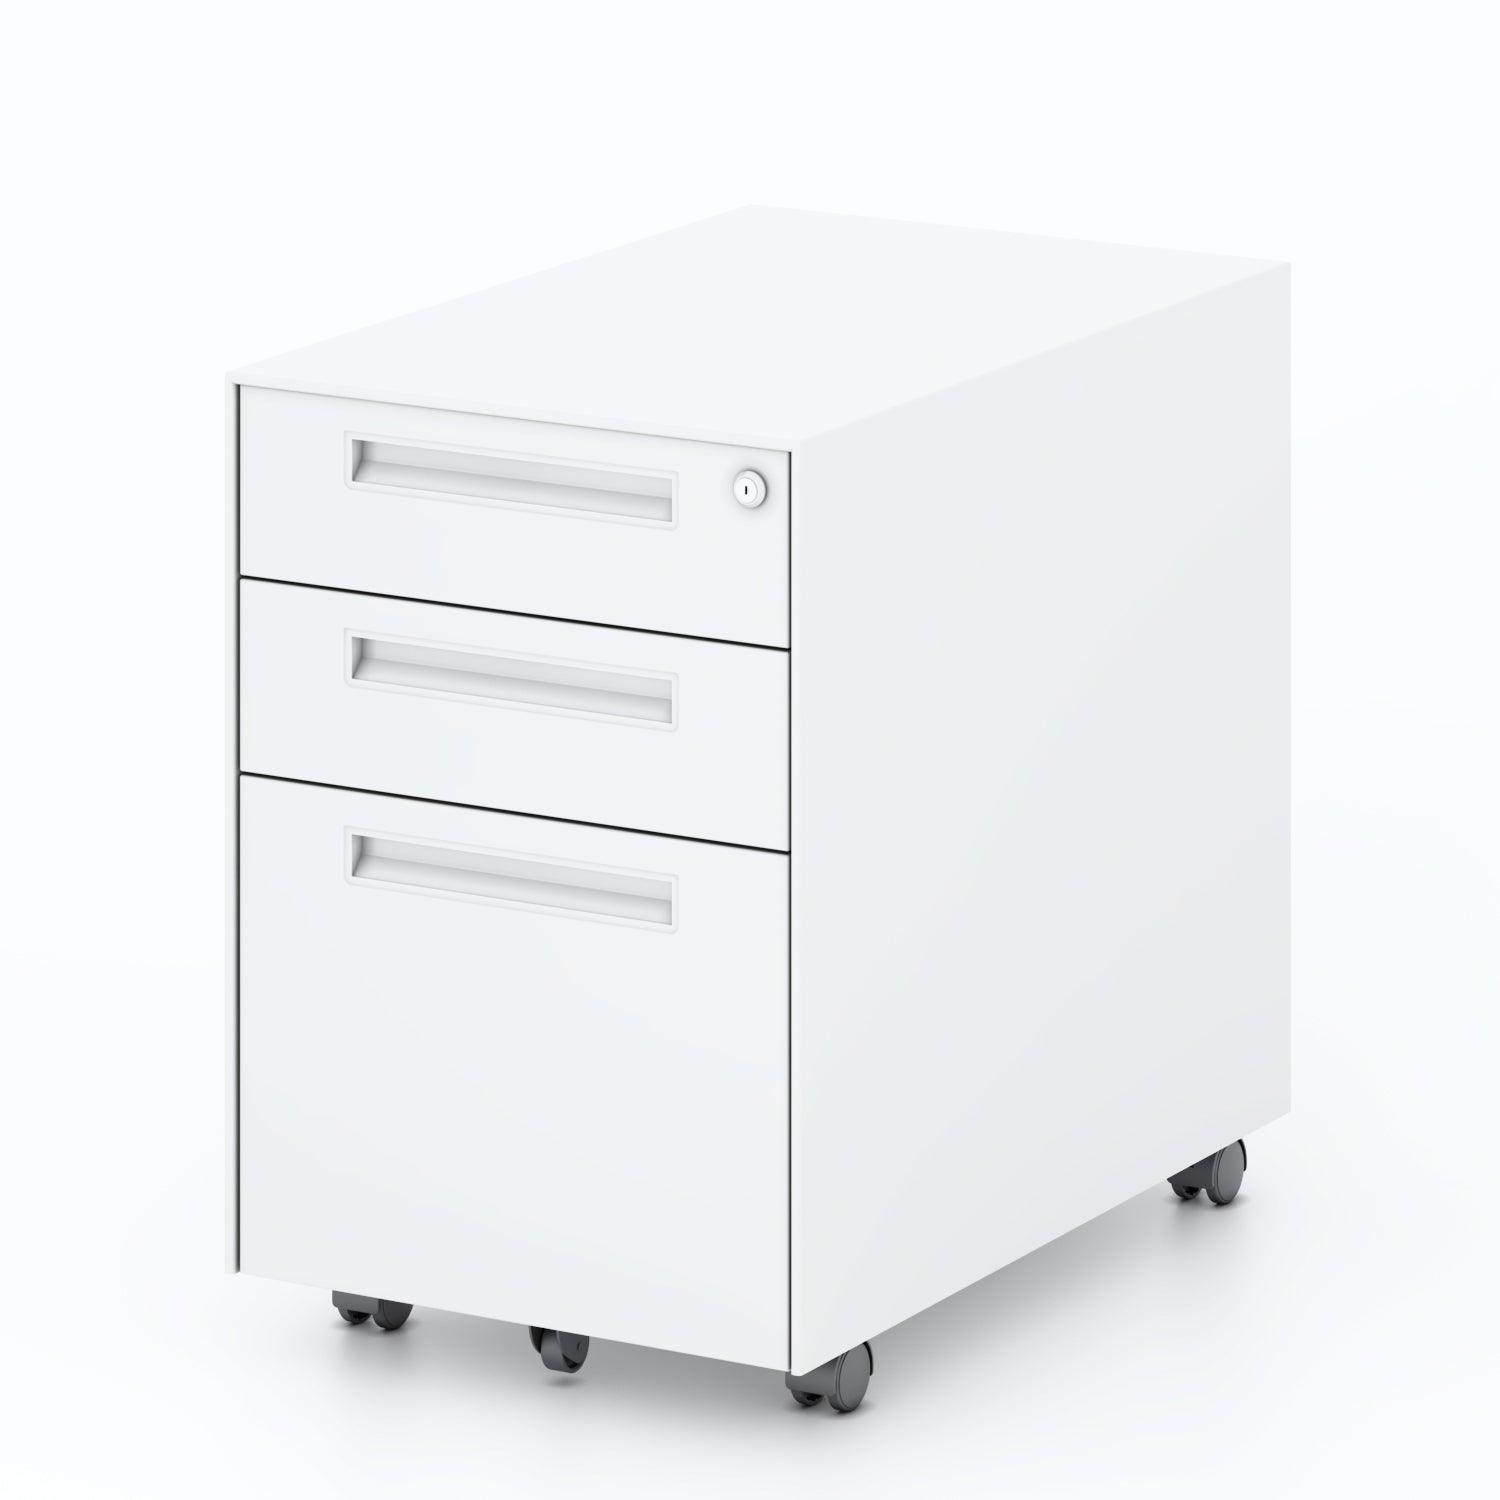 3 Drawer Metal Mobile Vertical Locking File Cabinet with Lock, Under Desk Rolling Filing Cabinets for for Home Office, Fully Assembled Except Wheels, Anti-Tilting Waterproof Moisture-Proof LamCham